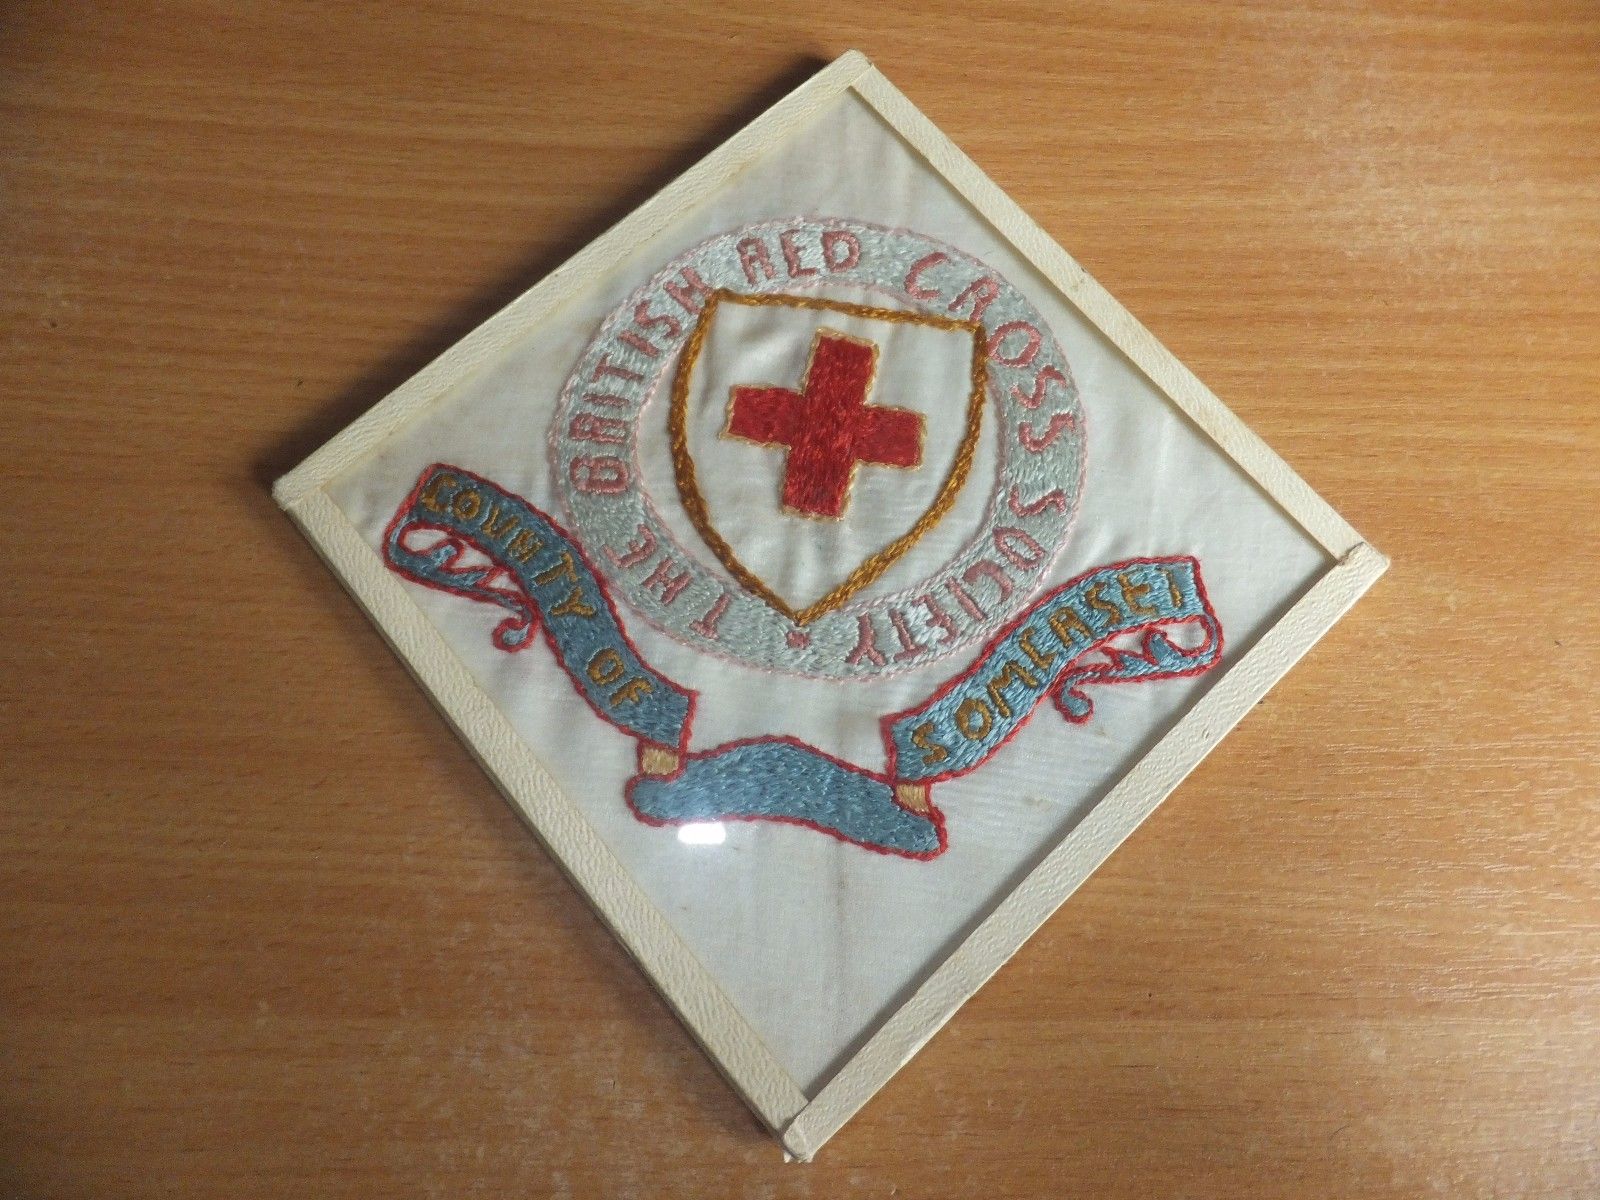 Embroidery by F Burlace Turpin at Netley in 1917